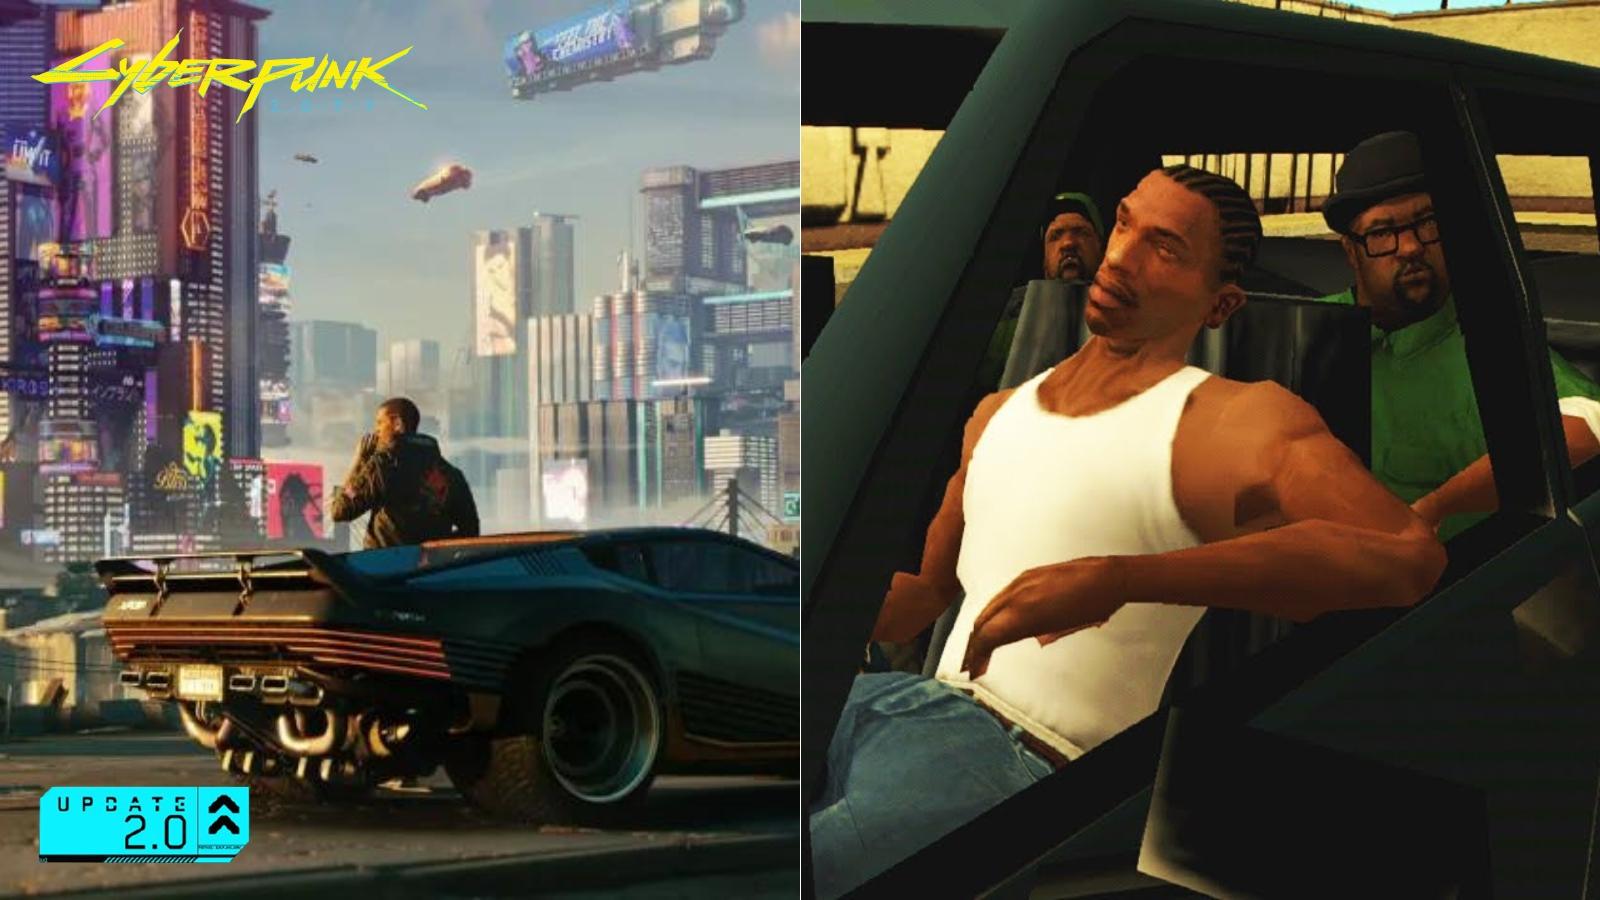 10 Easter Eggs That You Can Find In Cyberpunk 2077